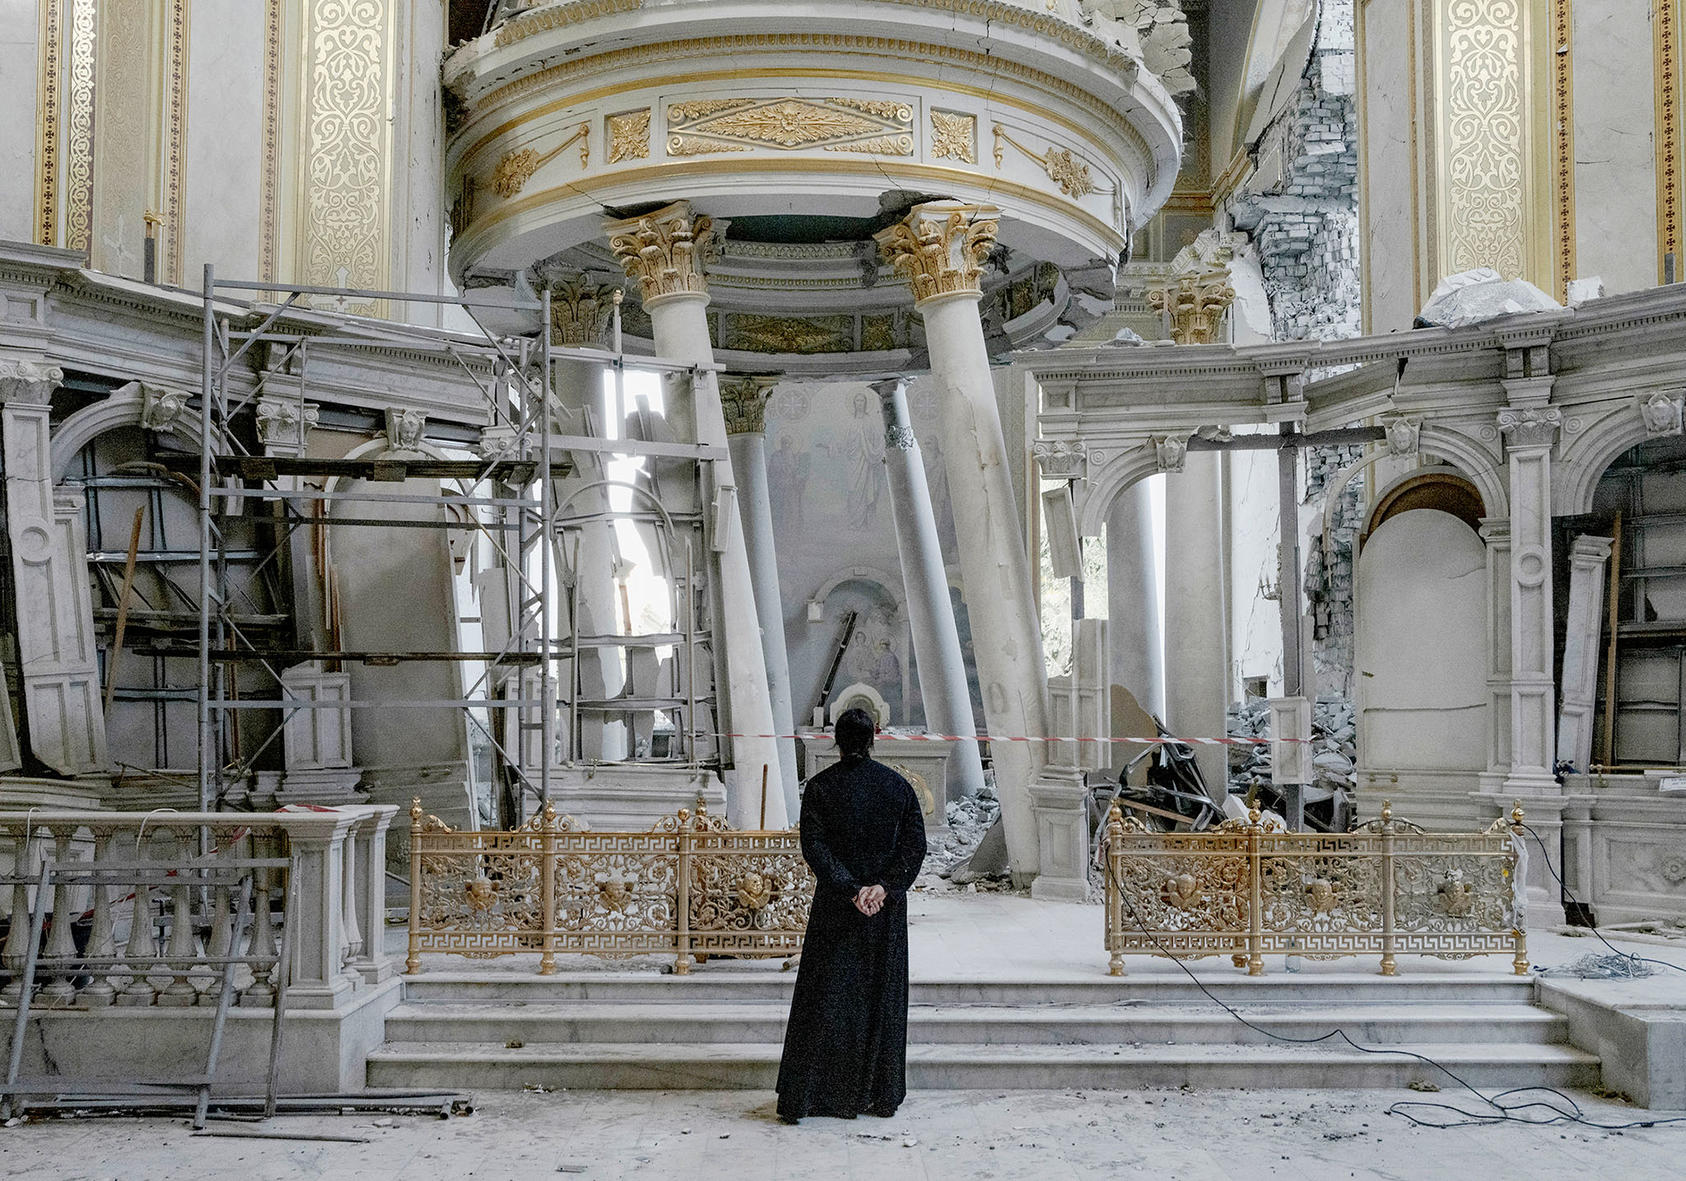 A priest inspects damage inside Transfiguration Cathedral, which was heavily damaged in Russian missile attacks, in Odesa, Ukraine, on July 24, 2023. (Photo by Emile Ducke/New York Times)